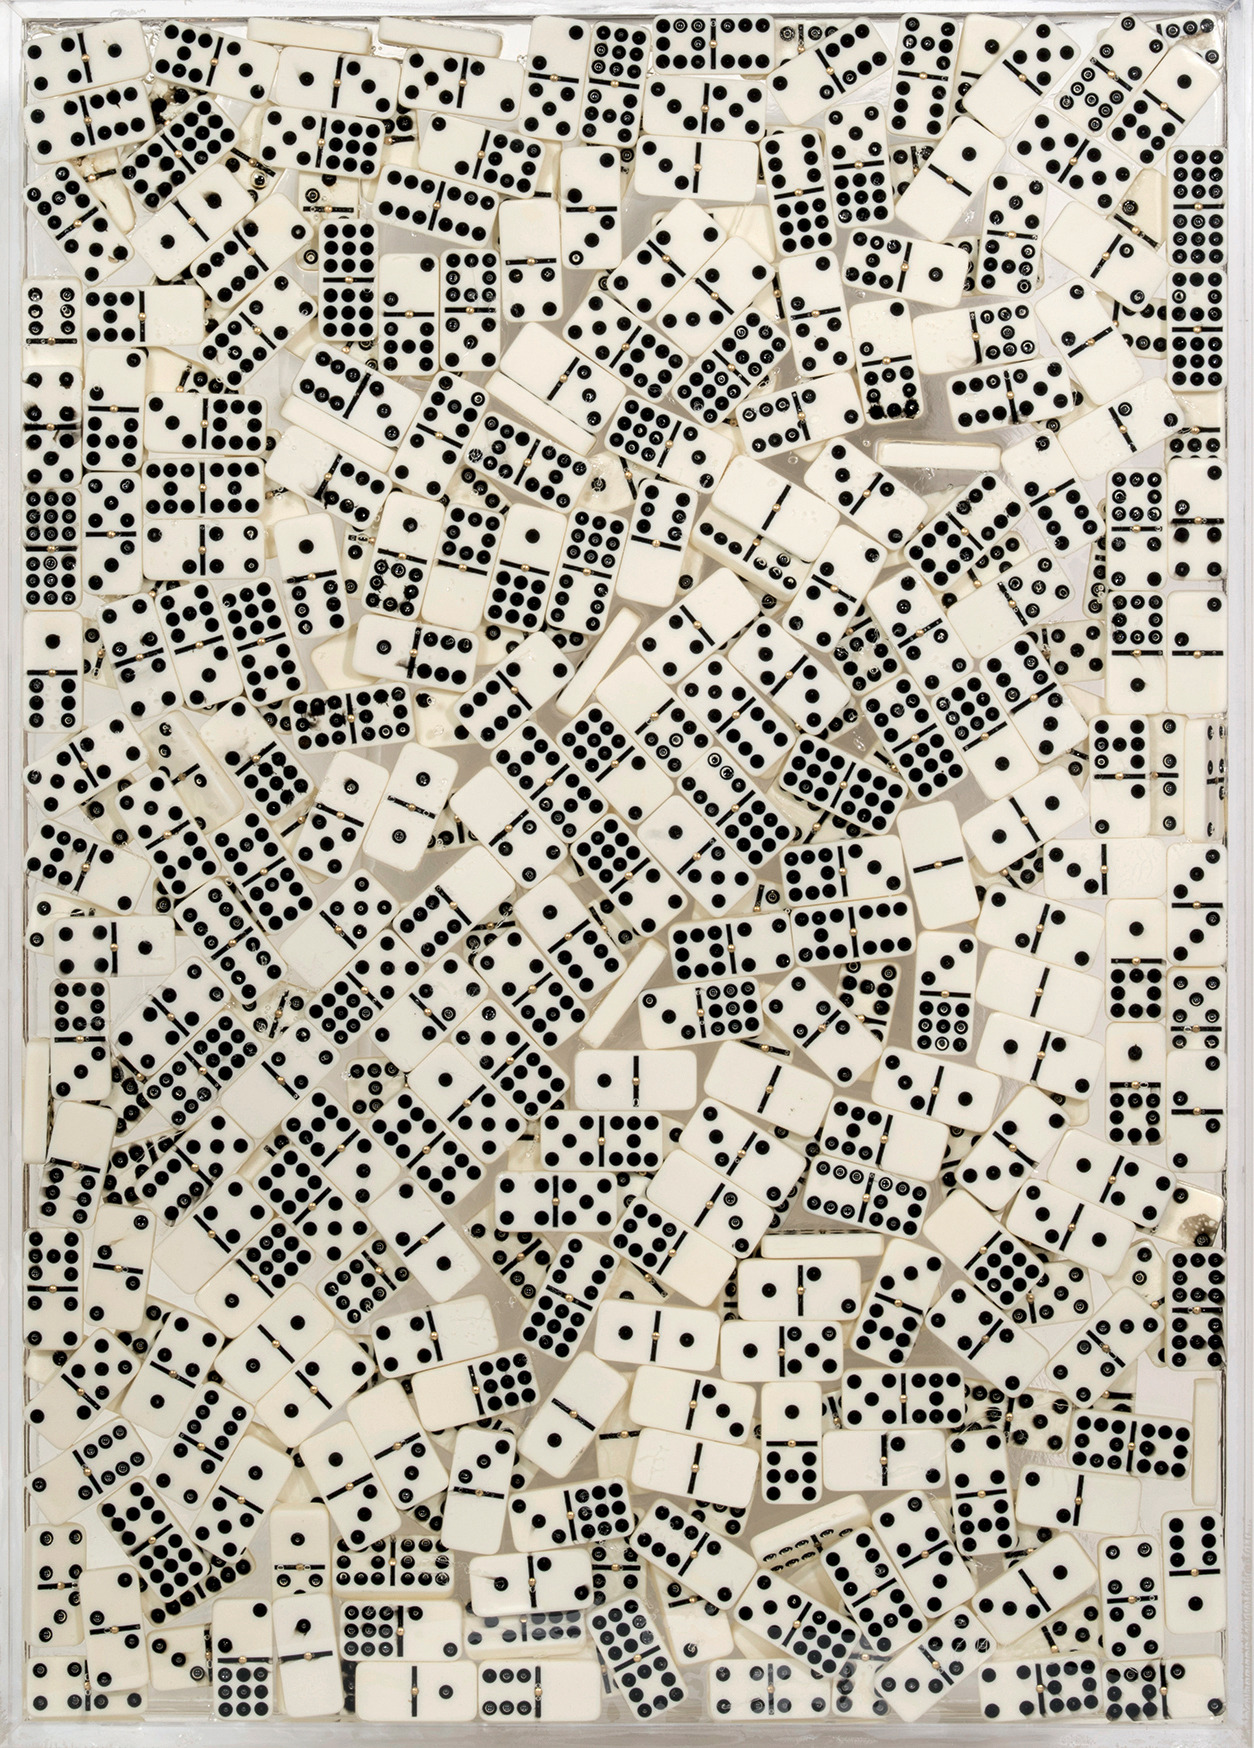 Arman (French, 1928-2005), Dominos. Plexiglass and resin with dominos, 70 x 50 cm. Unique.